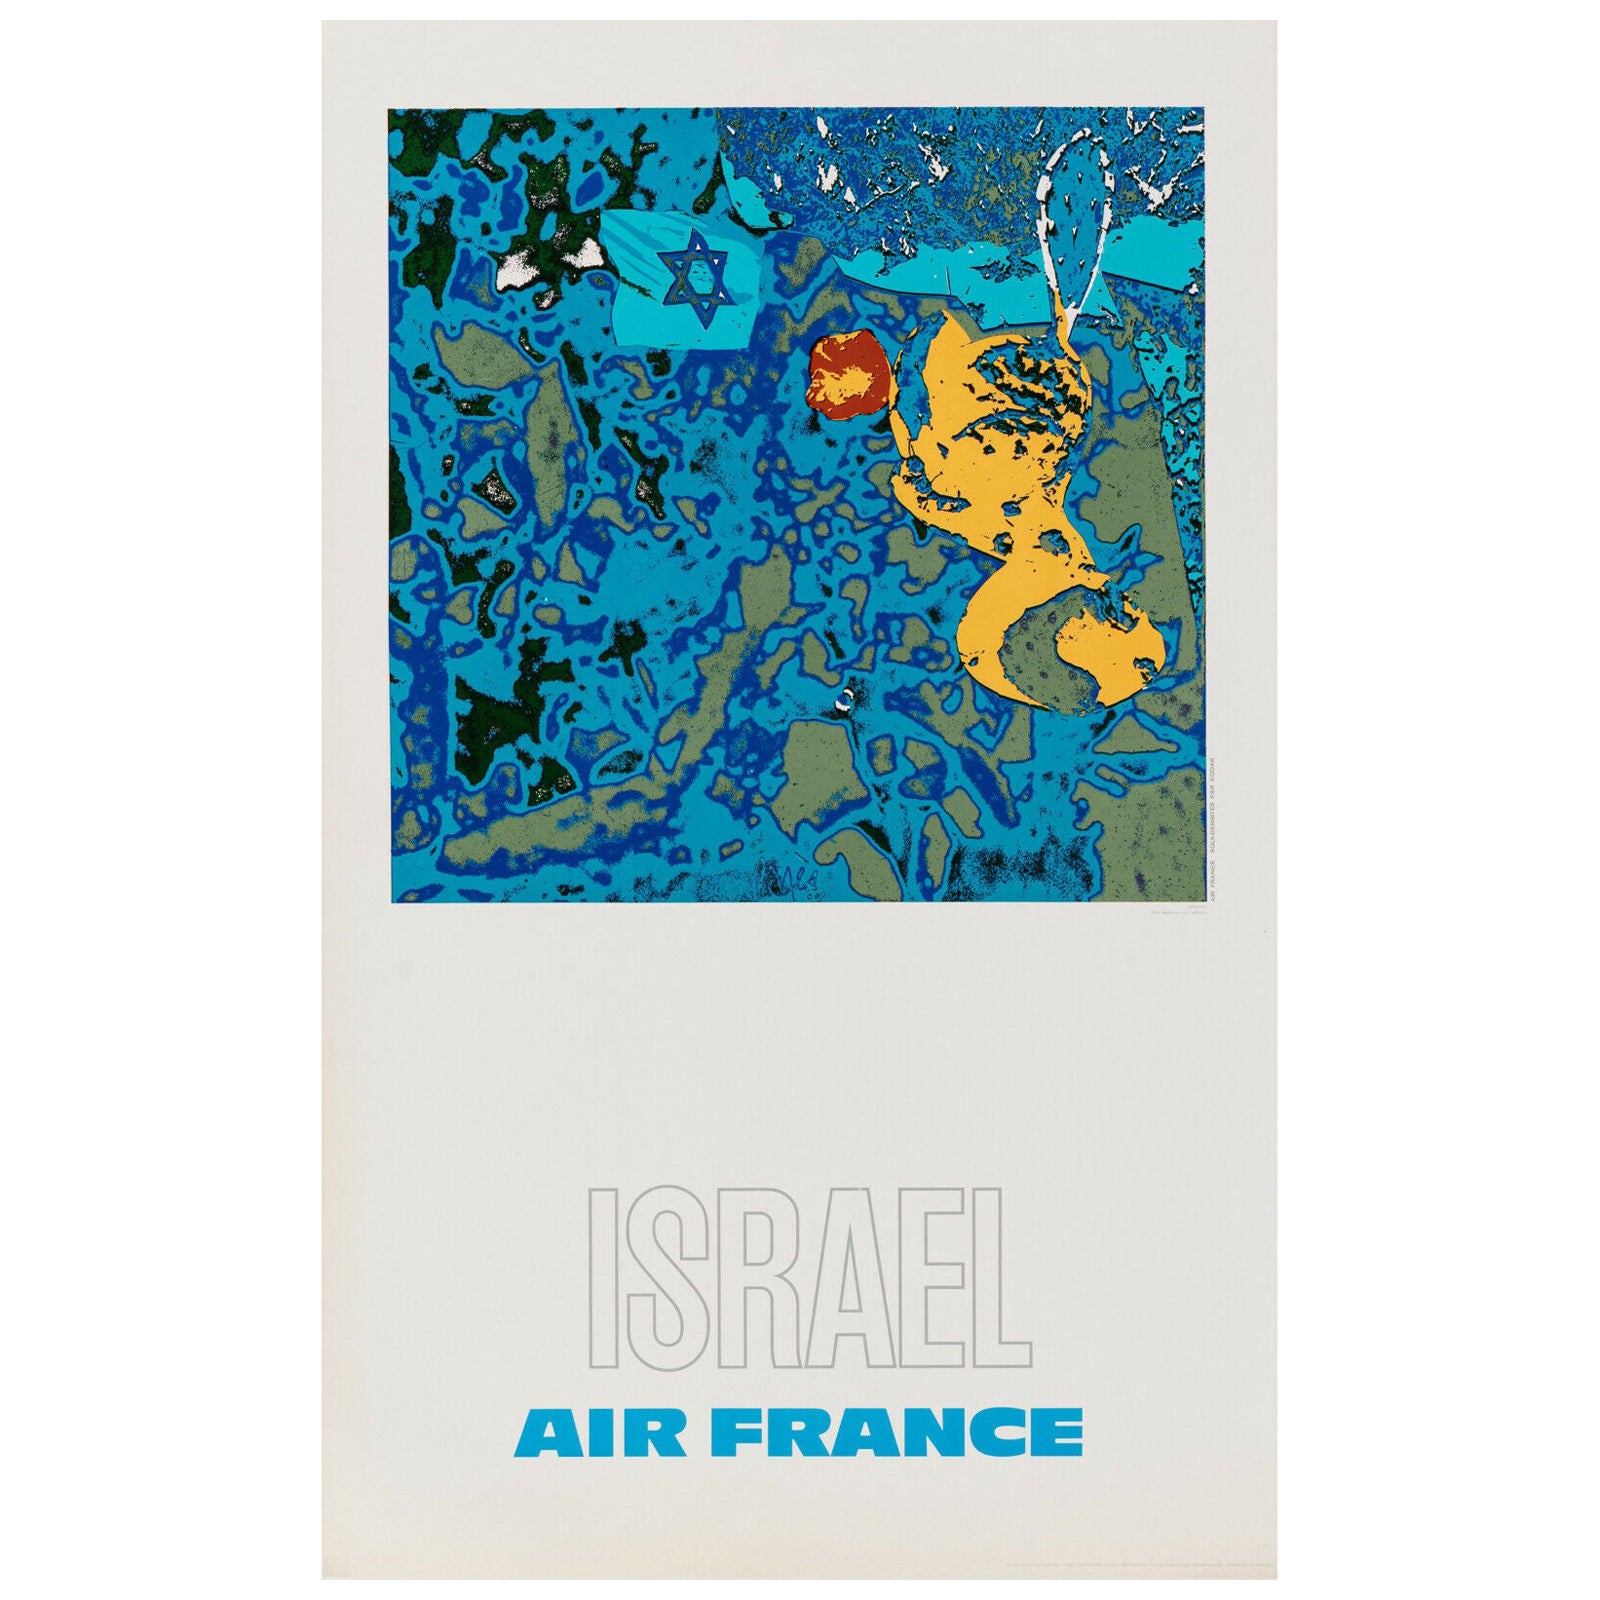 Affiche originale d'Airline, Raymond Pages, Air France, Israël, 1971